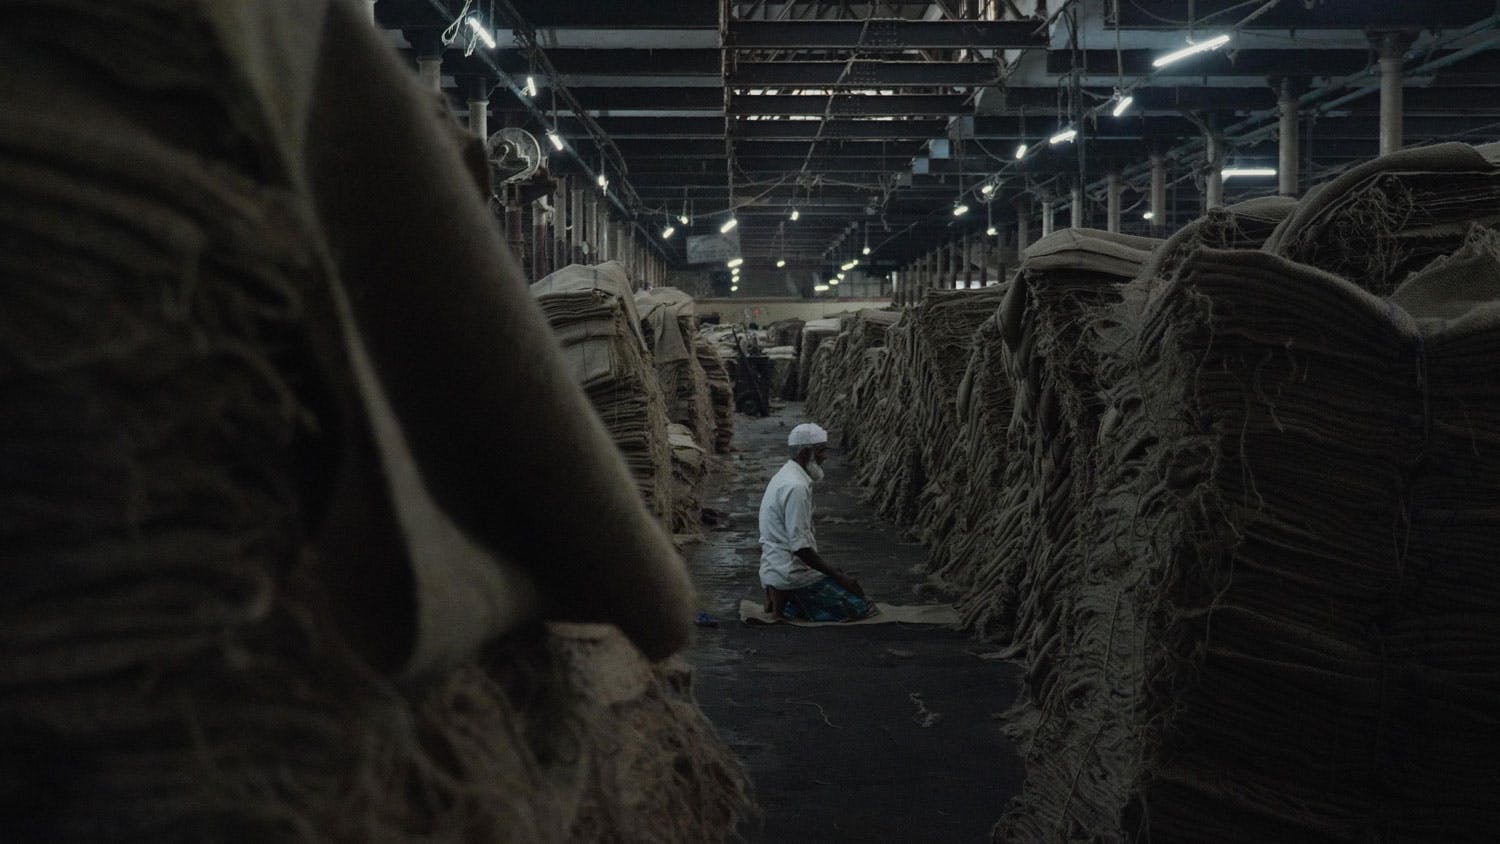 A man offers prayers on Hukumchand Mill's floor surrounded by jute stacks.